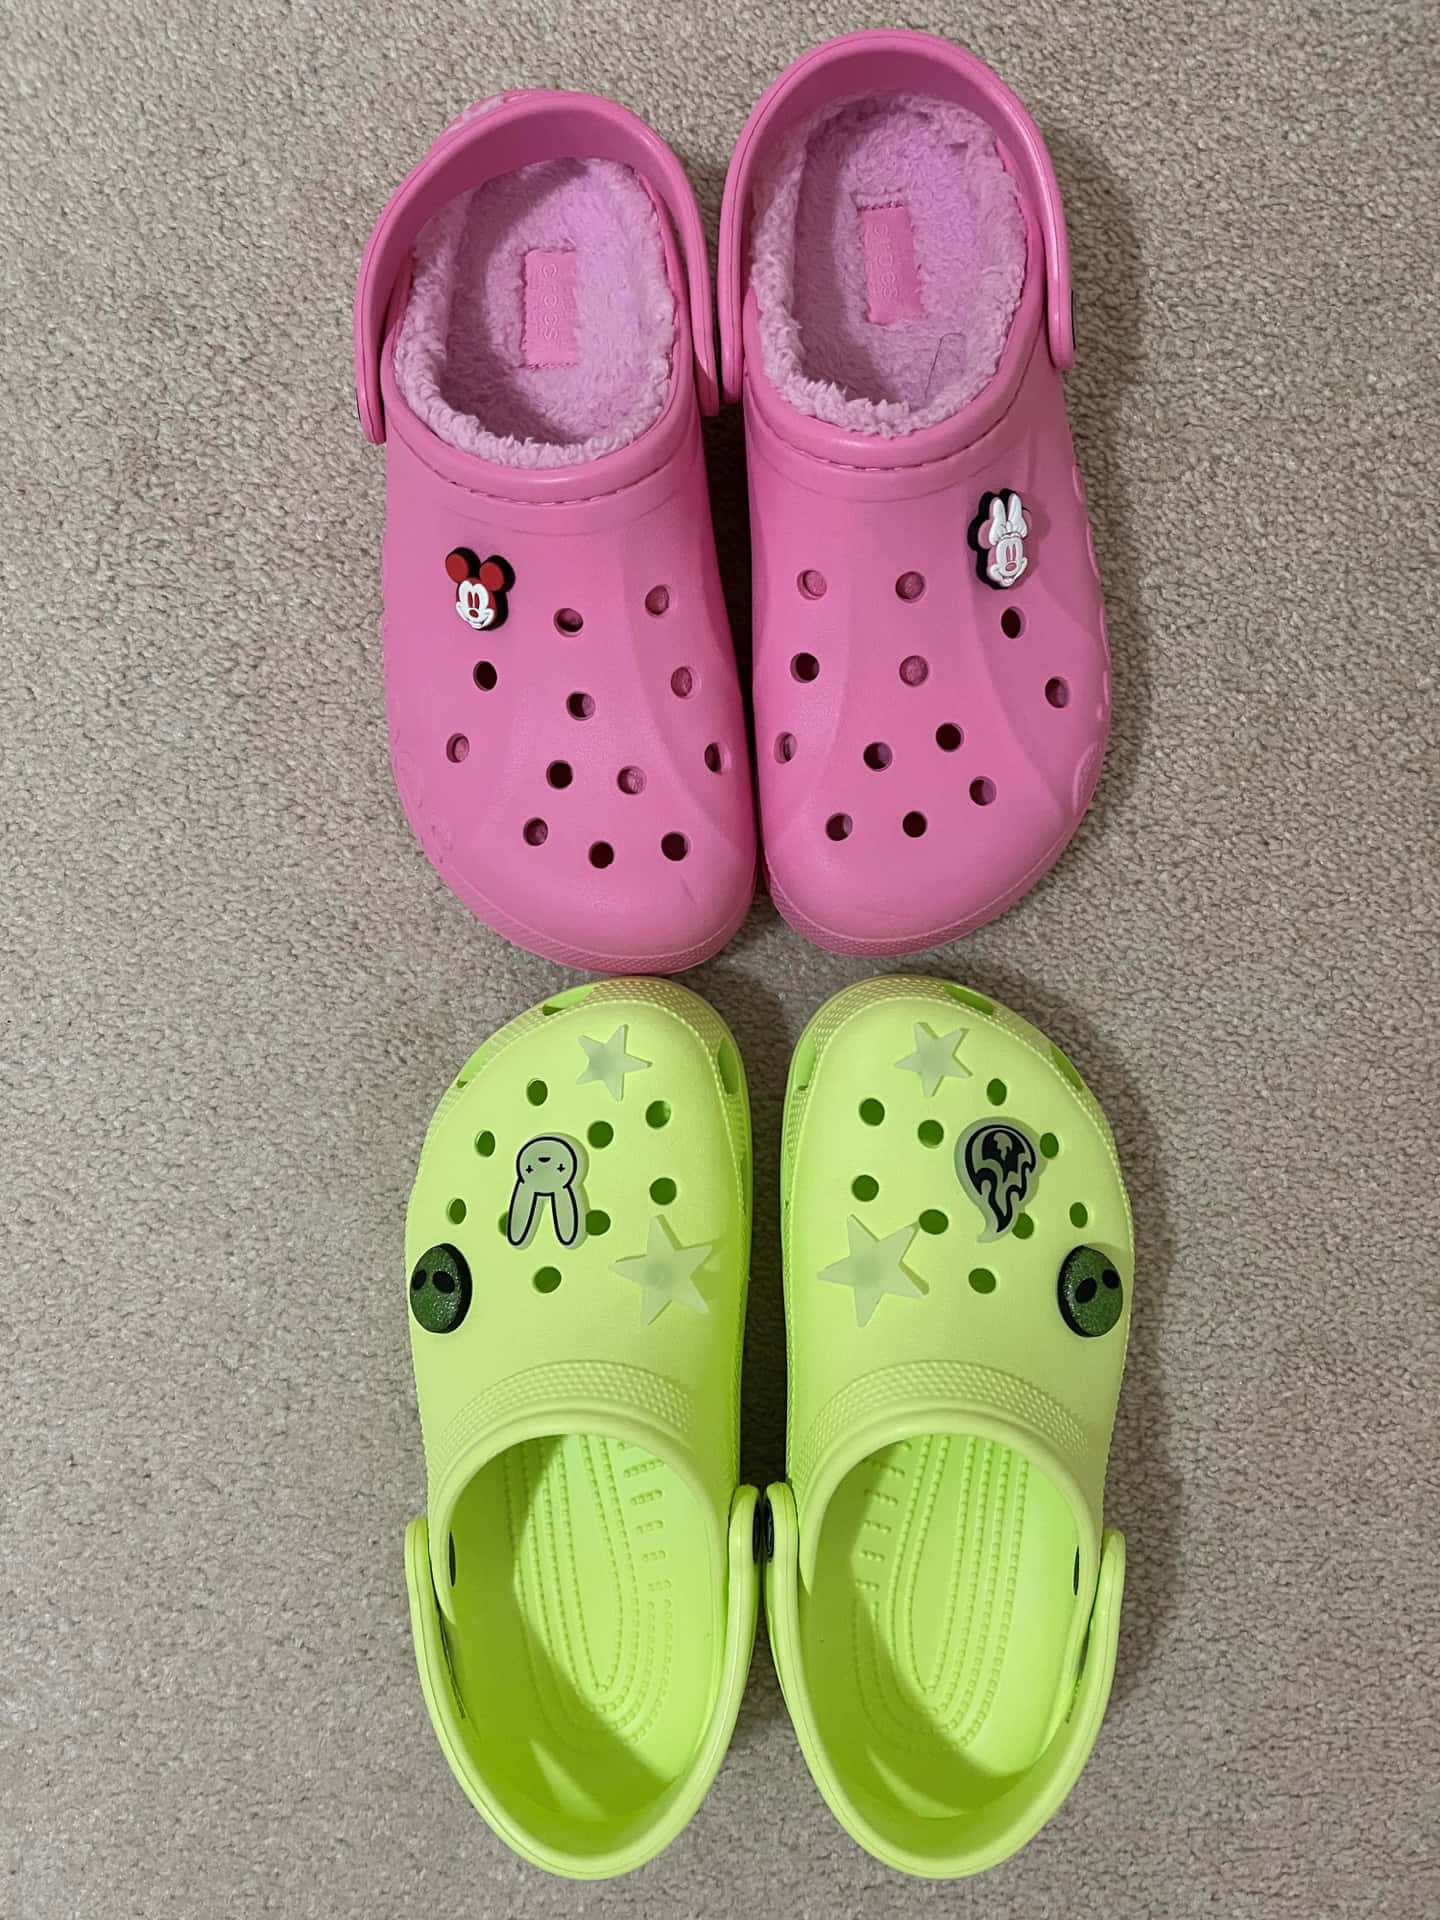 Explore the World in Comfort with Crocs!